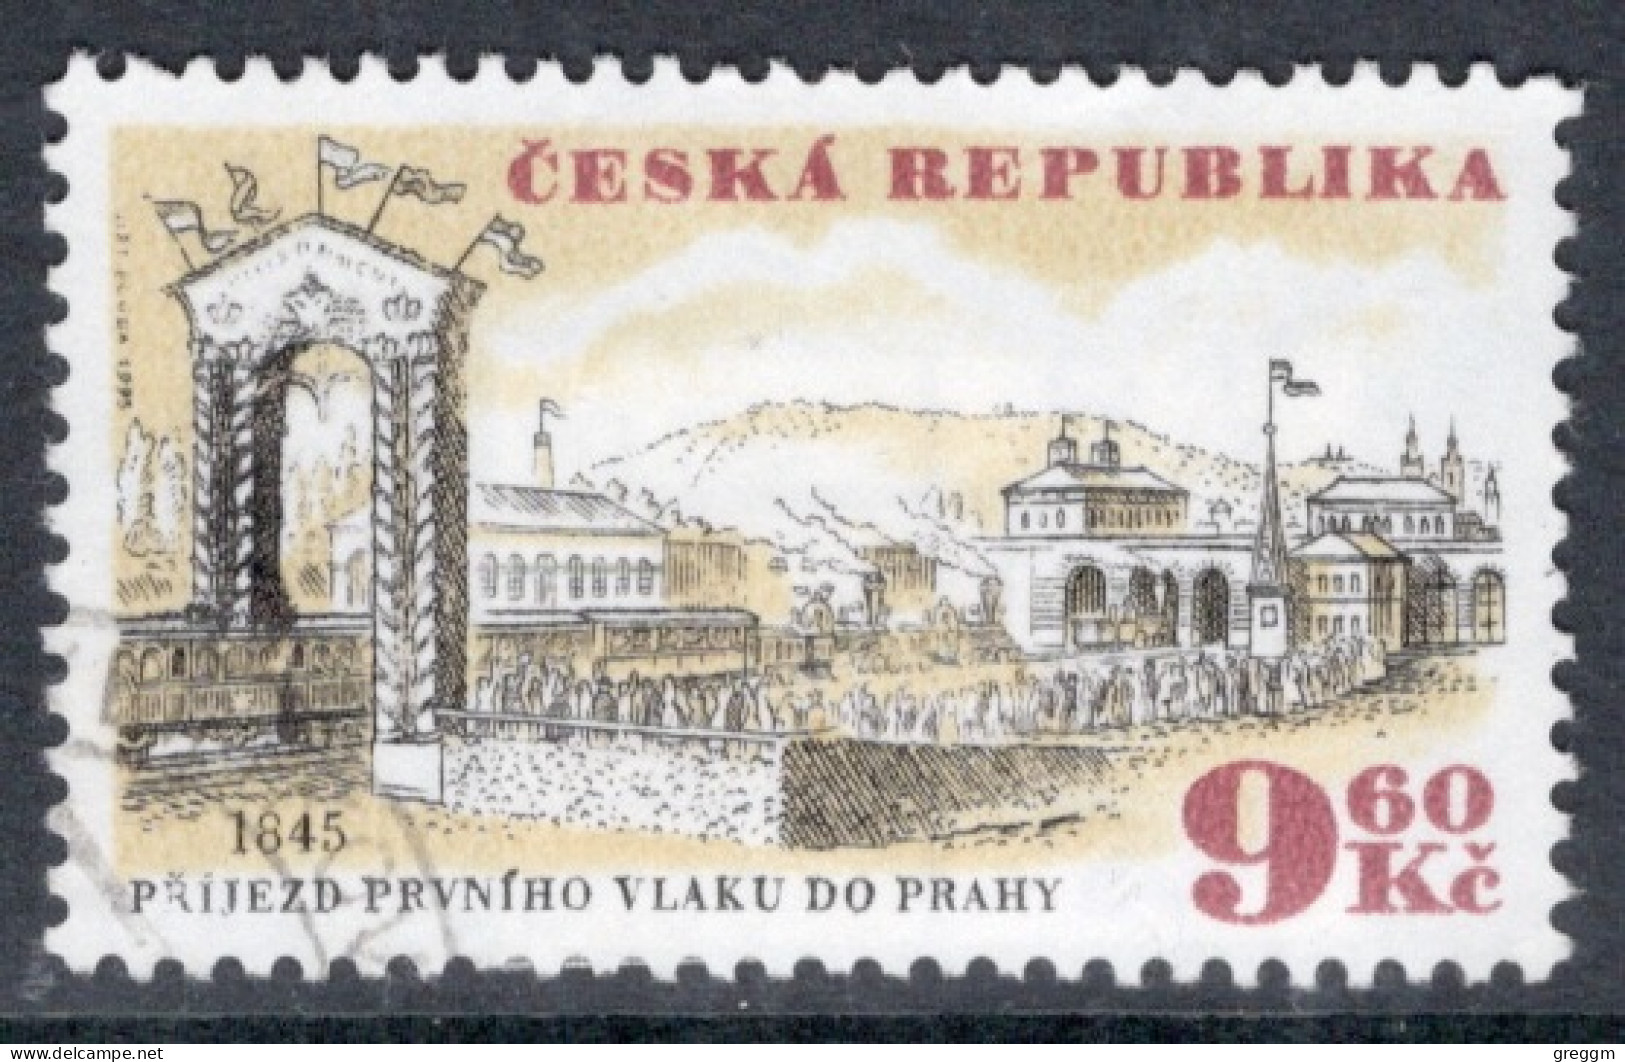 Czech Republic 1995 Single Stamp For The 150th Anniversary Of The Railway Connection Olomouc-Prague In Fine Used - Gebraucht